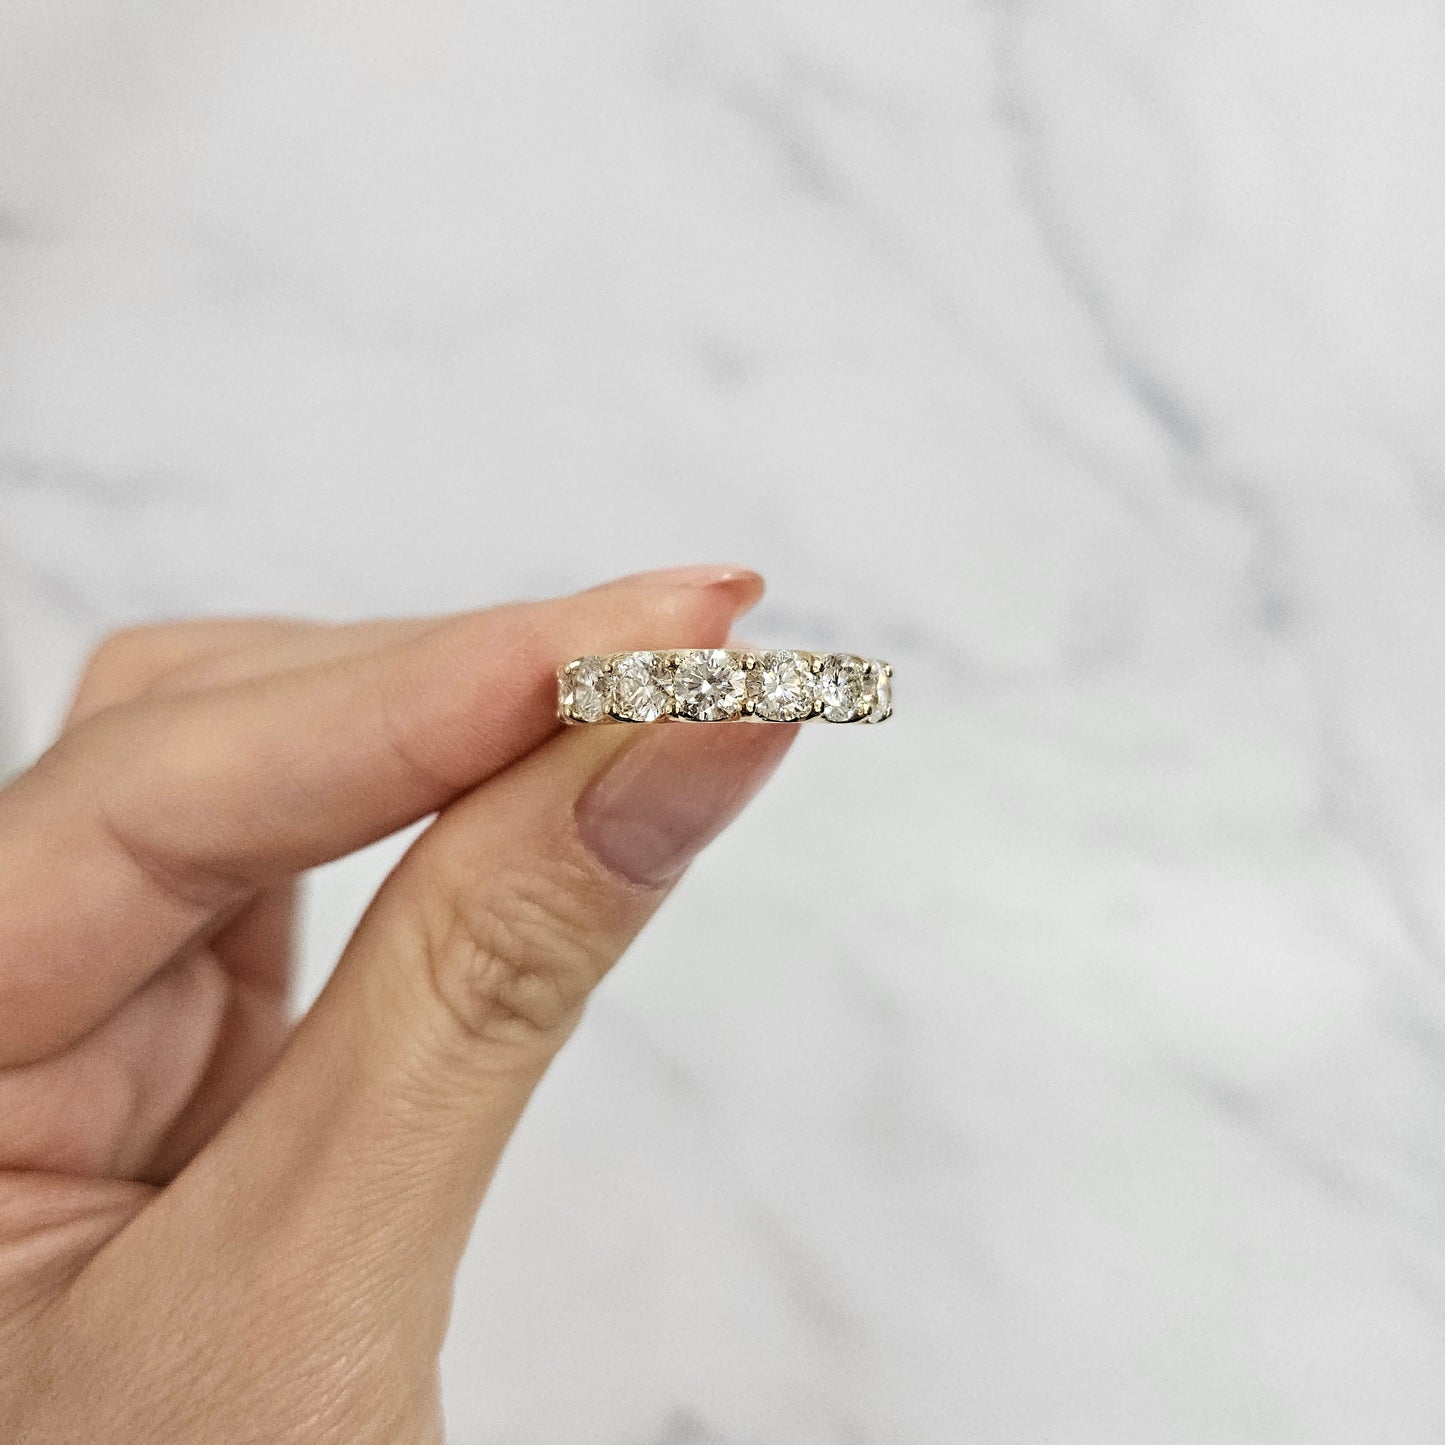 Natural Diamond Stackable Eternity Band/8 stones Diamond 2.4ct Band/Eternity Diamond Band/Diamond Wedding Band/Anniversary Gift